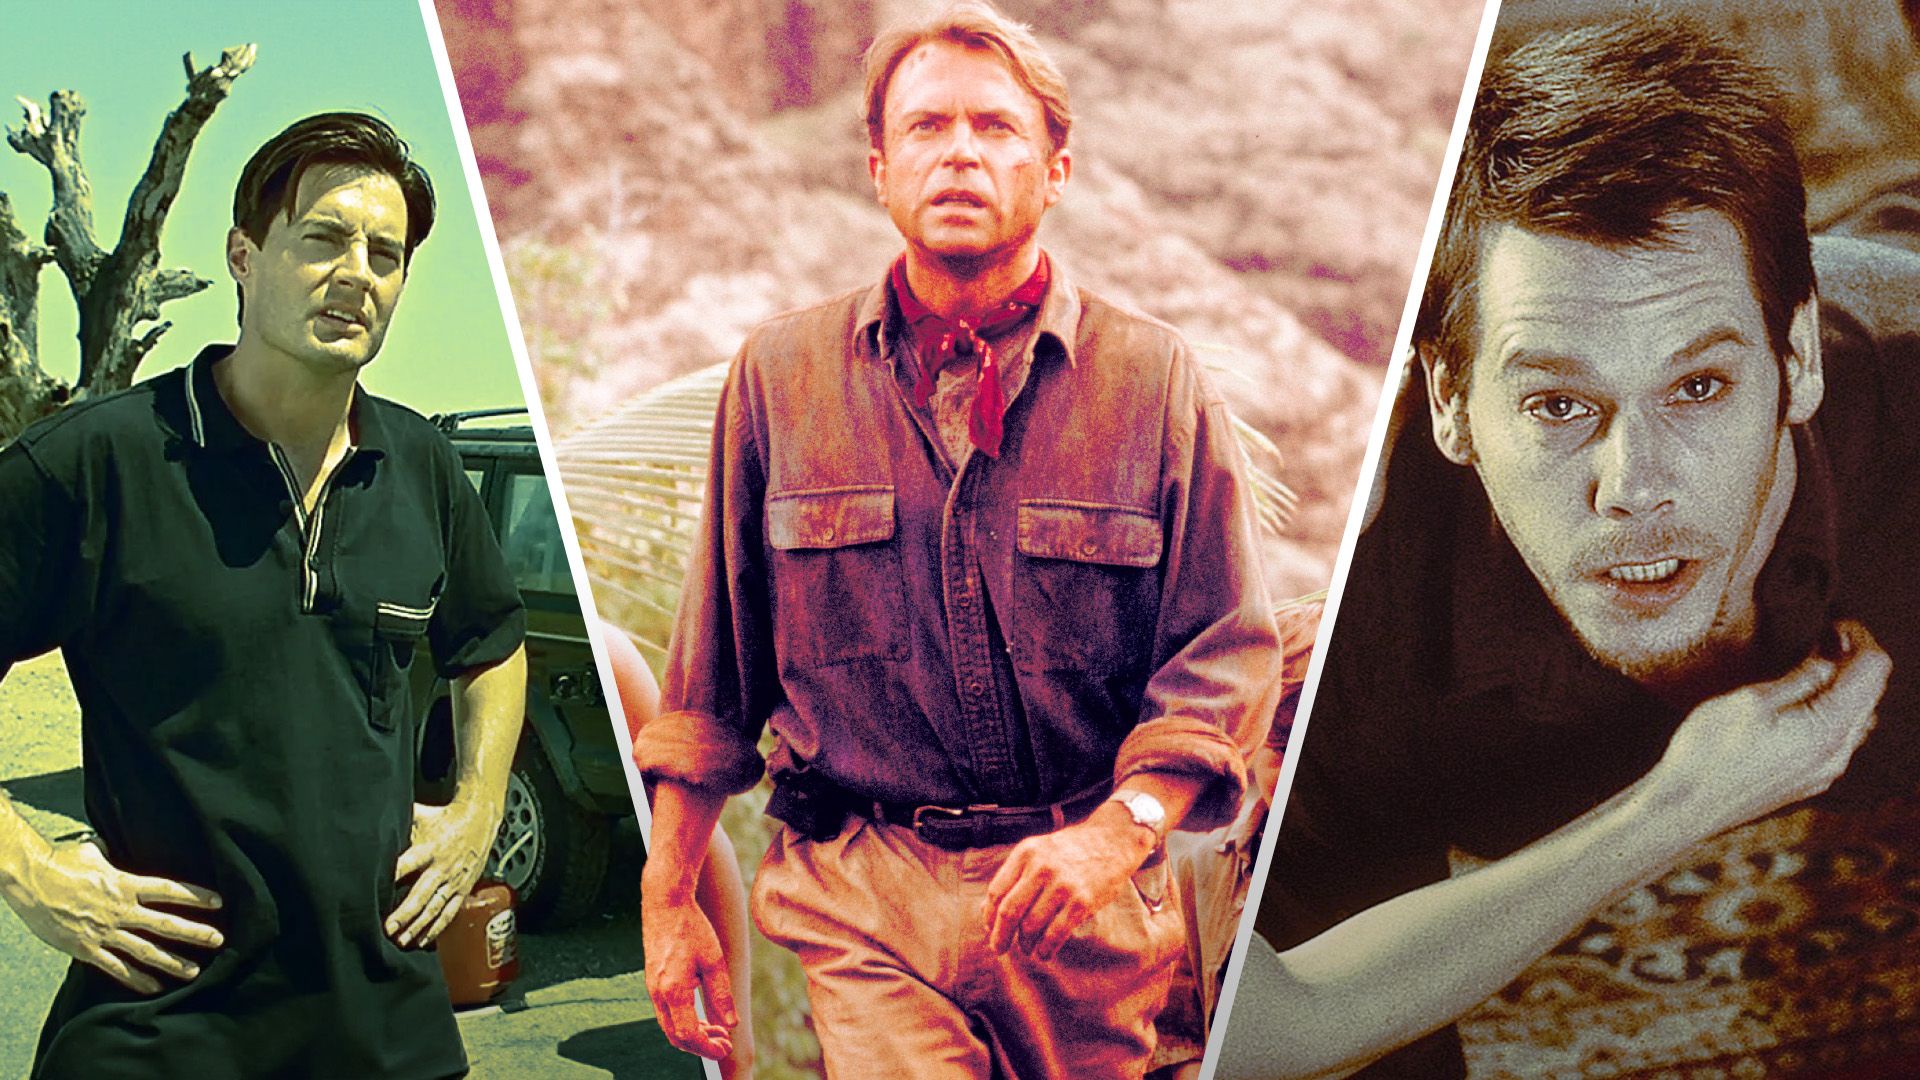 4 Underrated Movies That Prove Jurassic Park’s Writer Is a Great Director